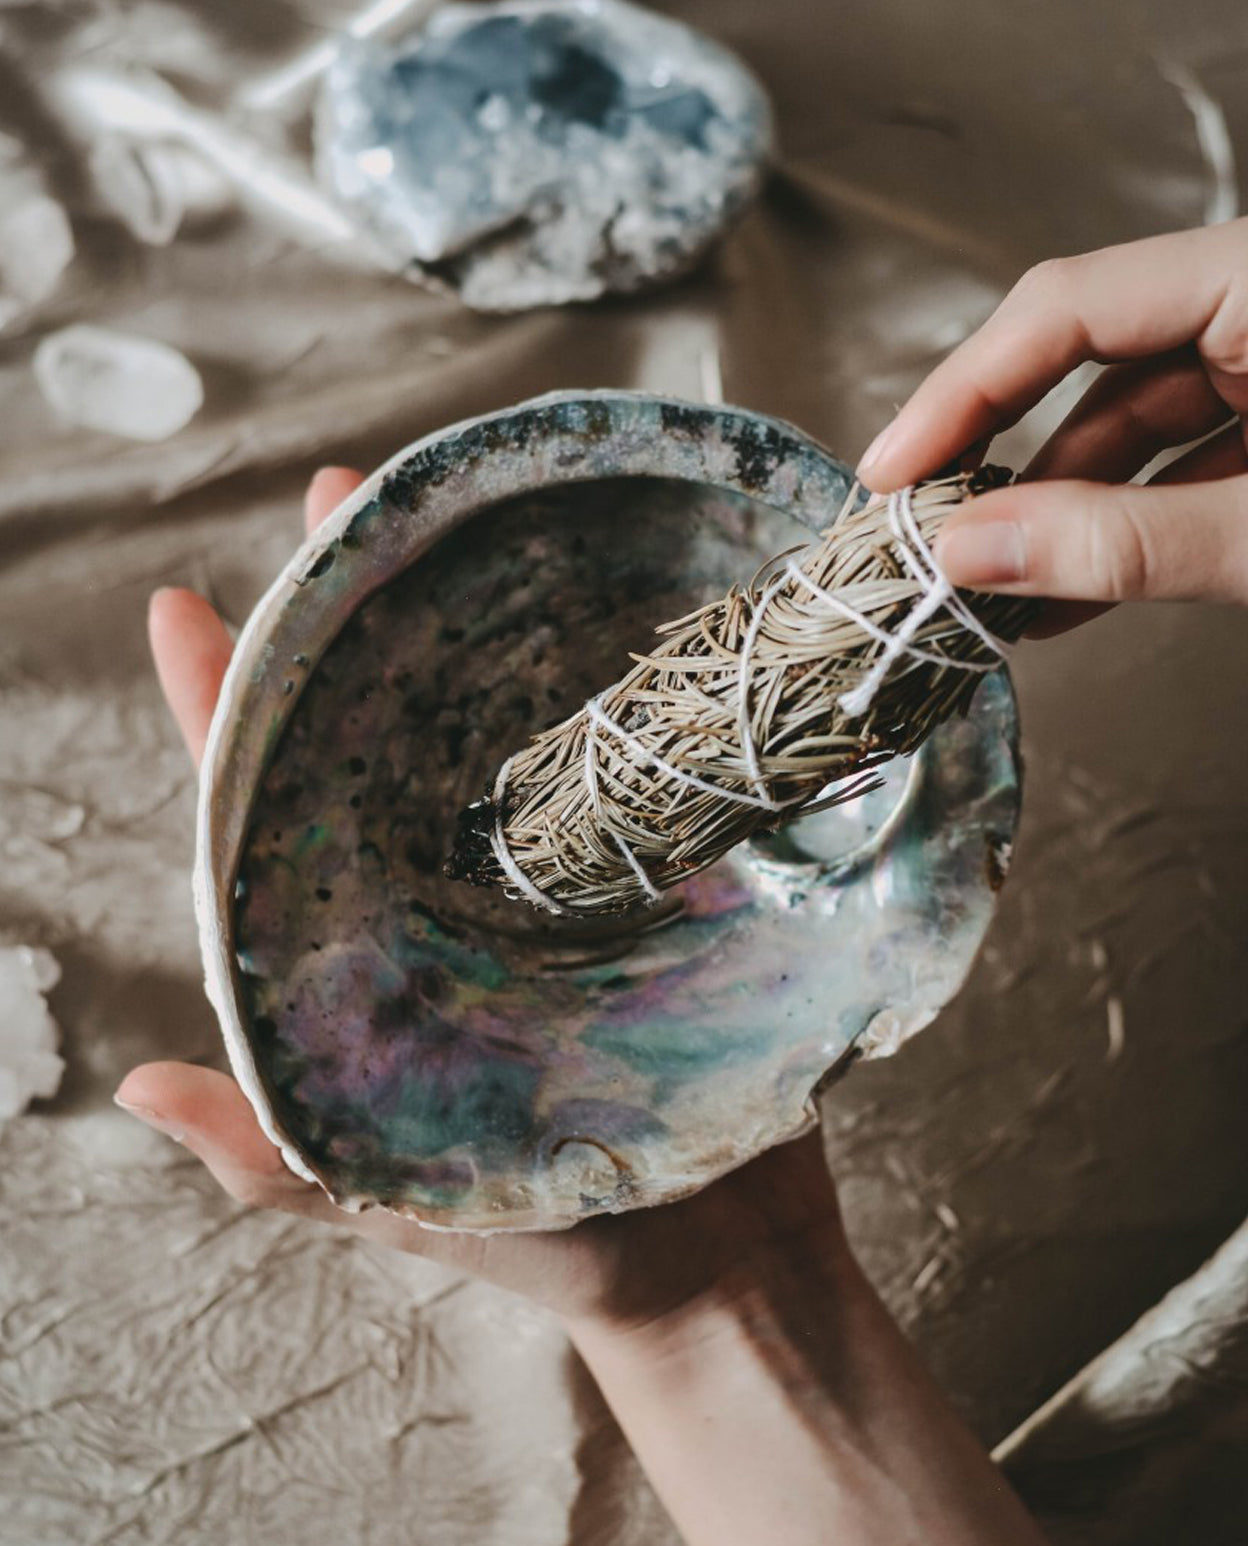 A hand holding an abalone shell being used as a smudging bowl with smudge sticks inside.